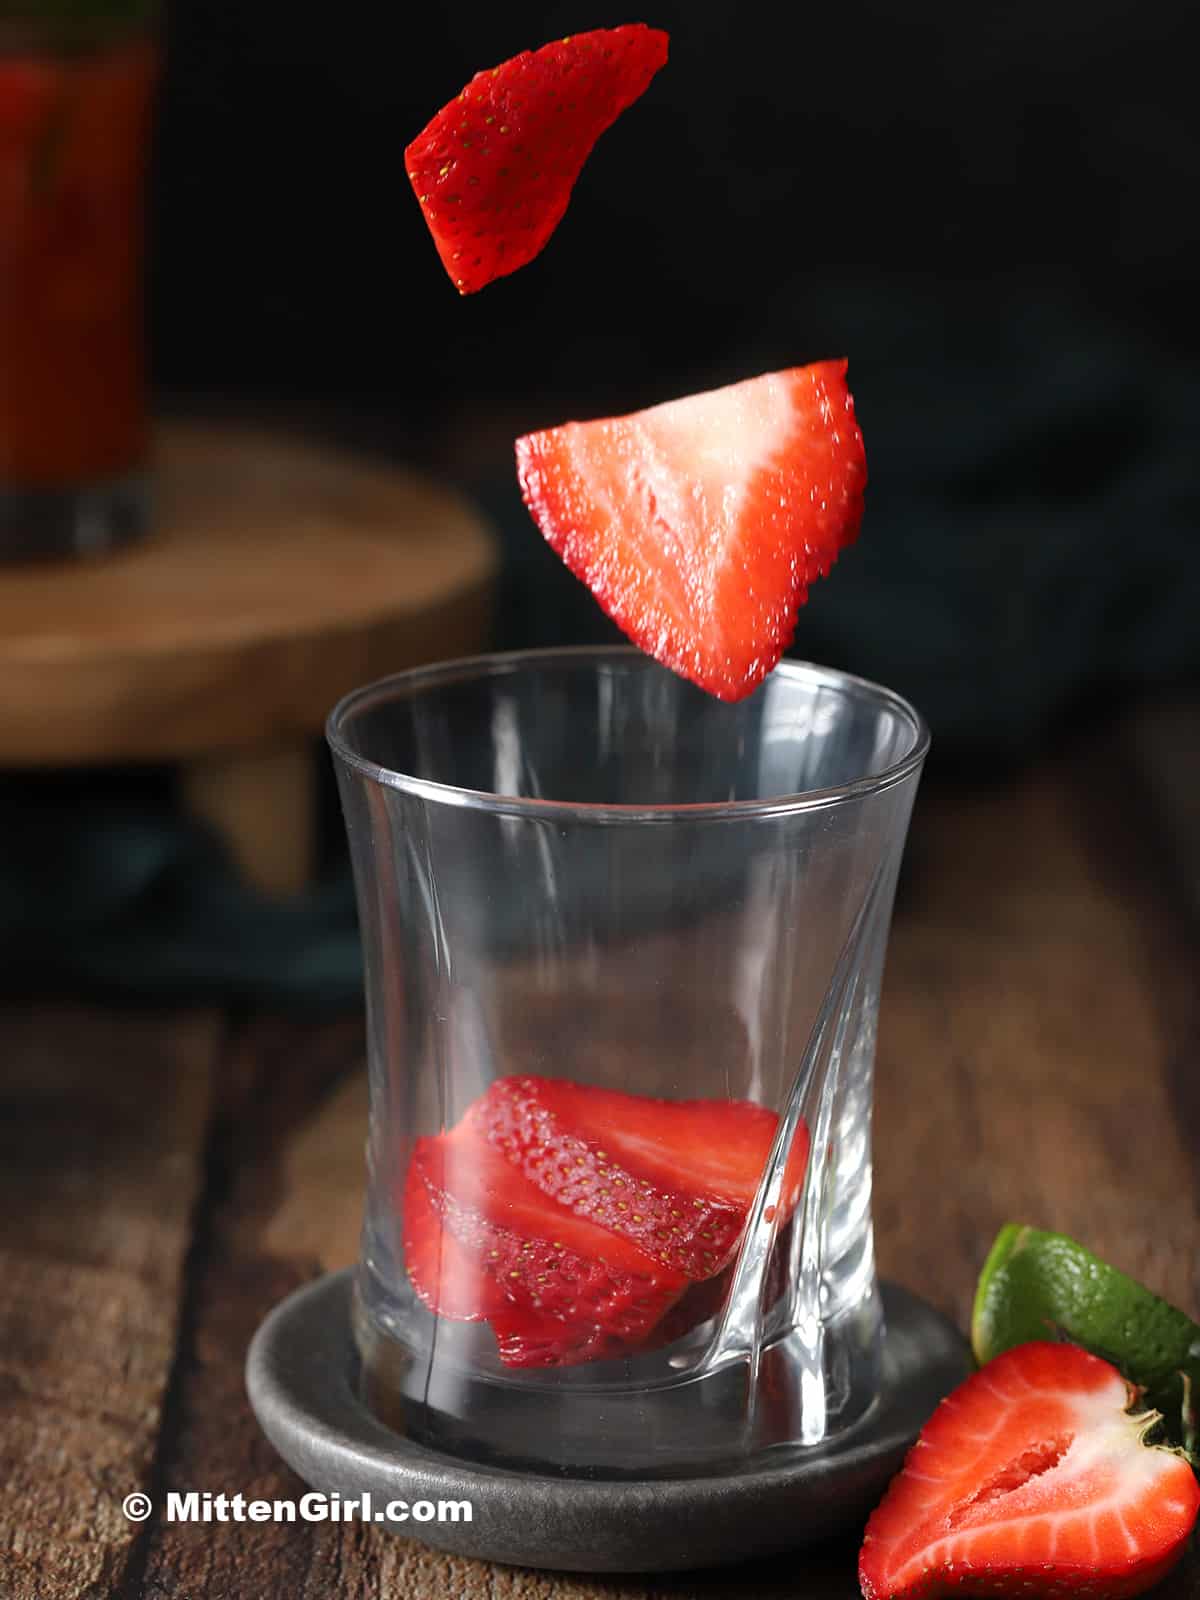 Strawberry slices being dropped into a rocks glass.